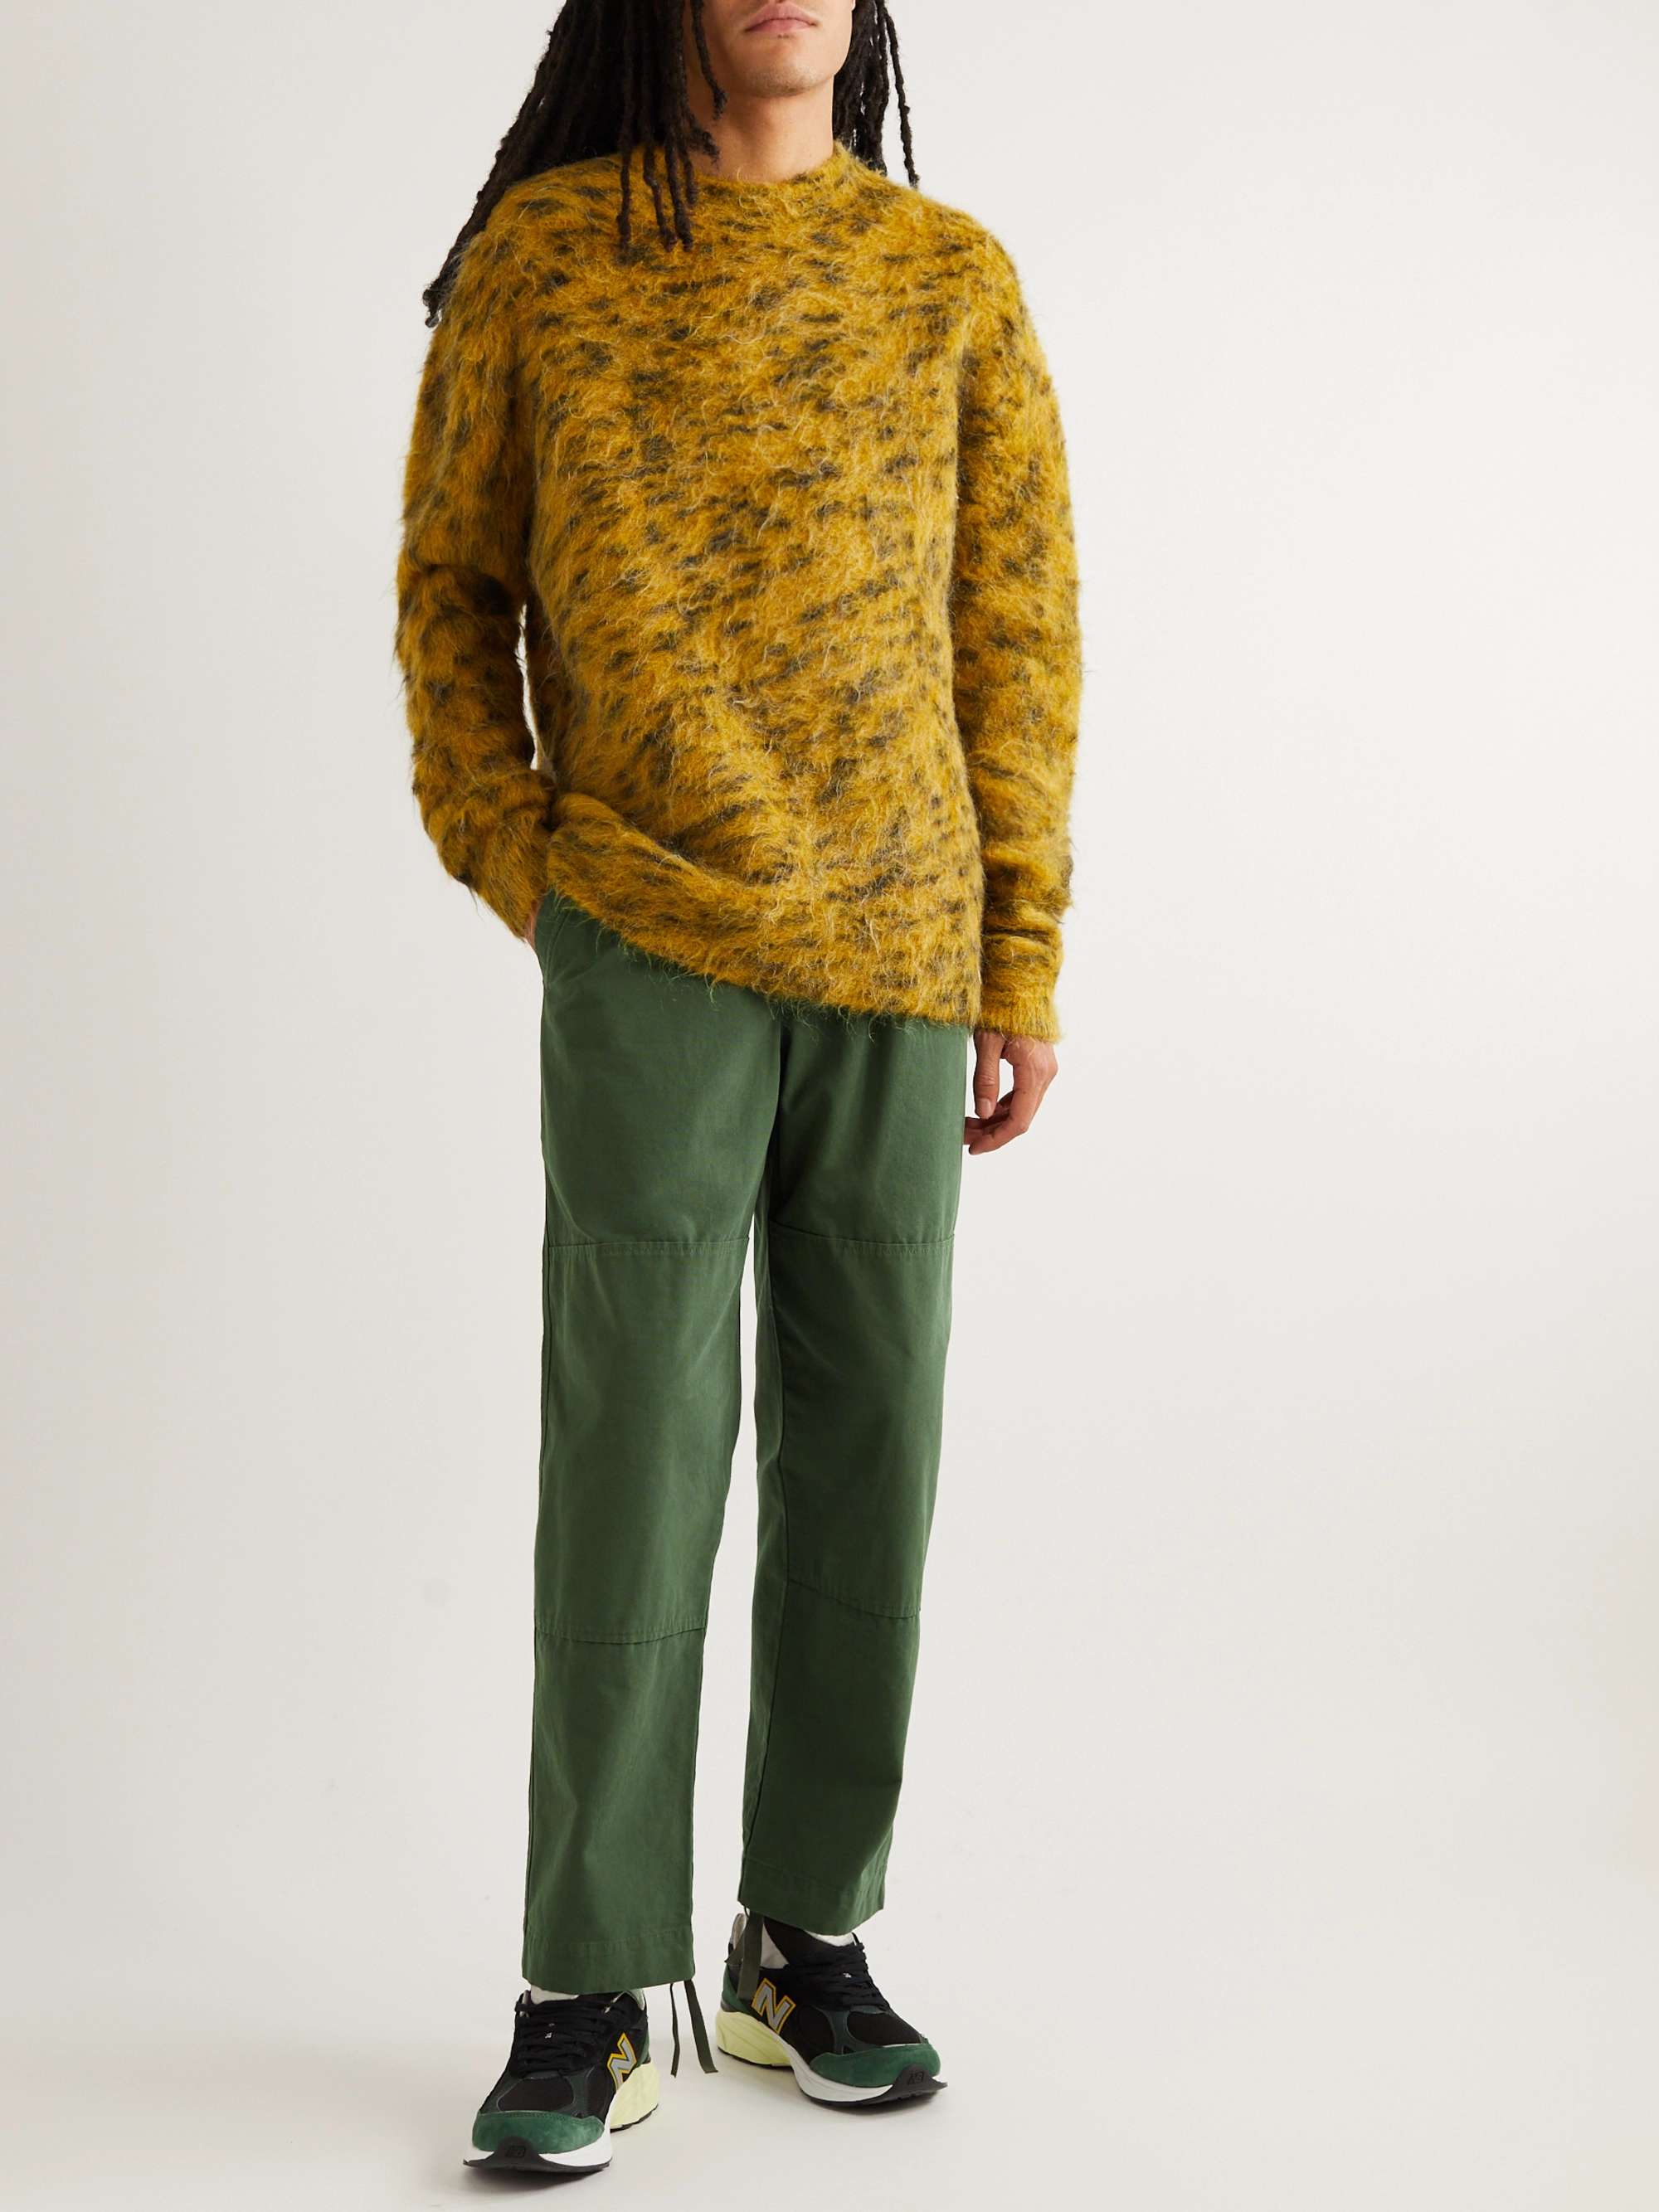 FOLK Assembly Brushed Cotton-Twill Trousers